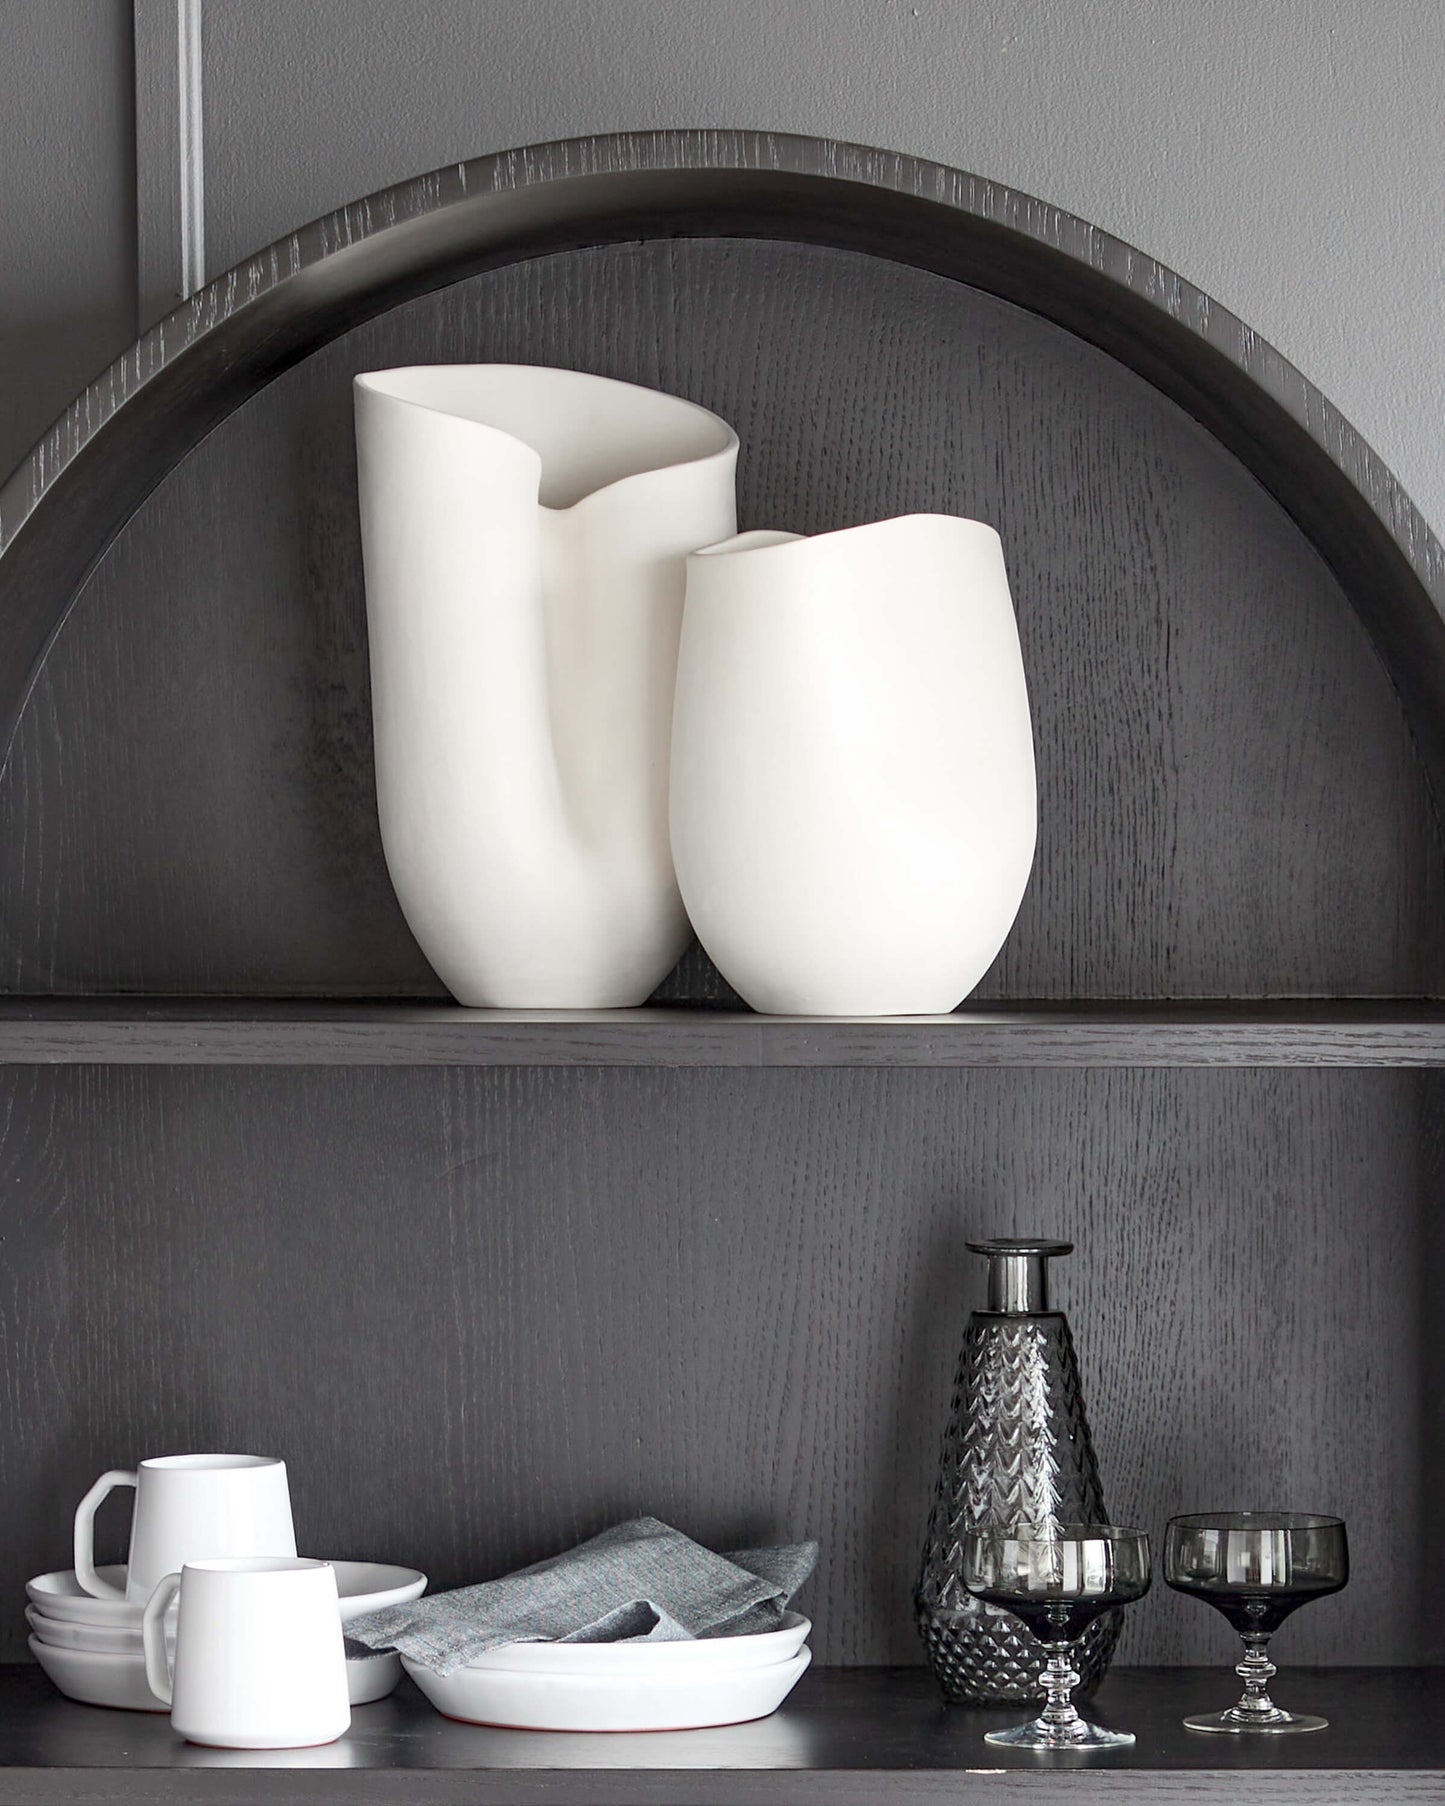 
                  
                    Large and Medium Zoya Vases styled on the top shelf of a modern black hutch. Part of Fairkind's Morocco Ceramic Collection.
                  
                